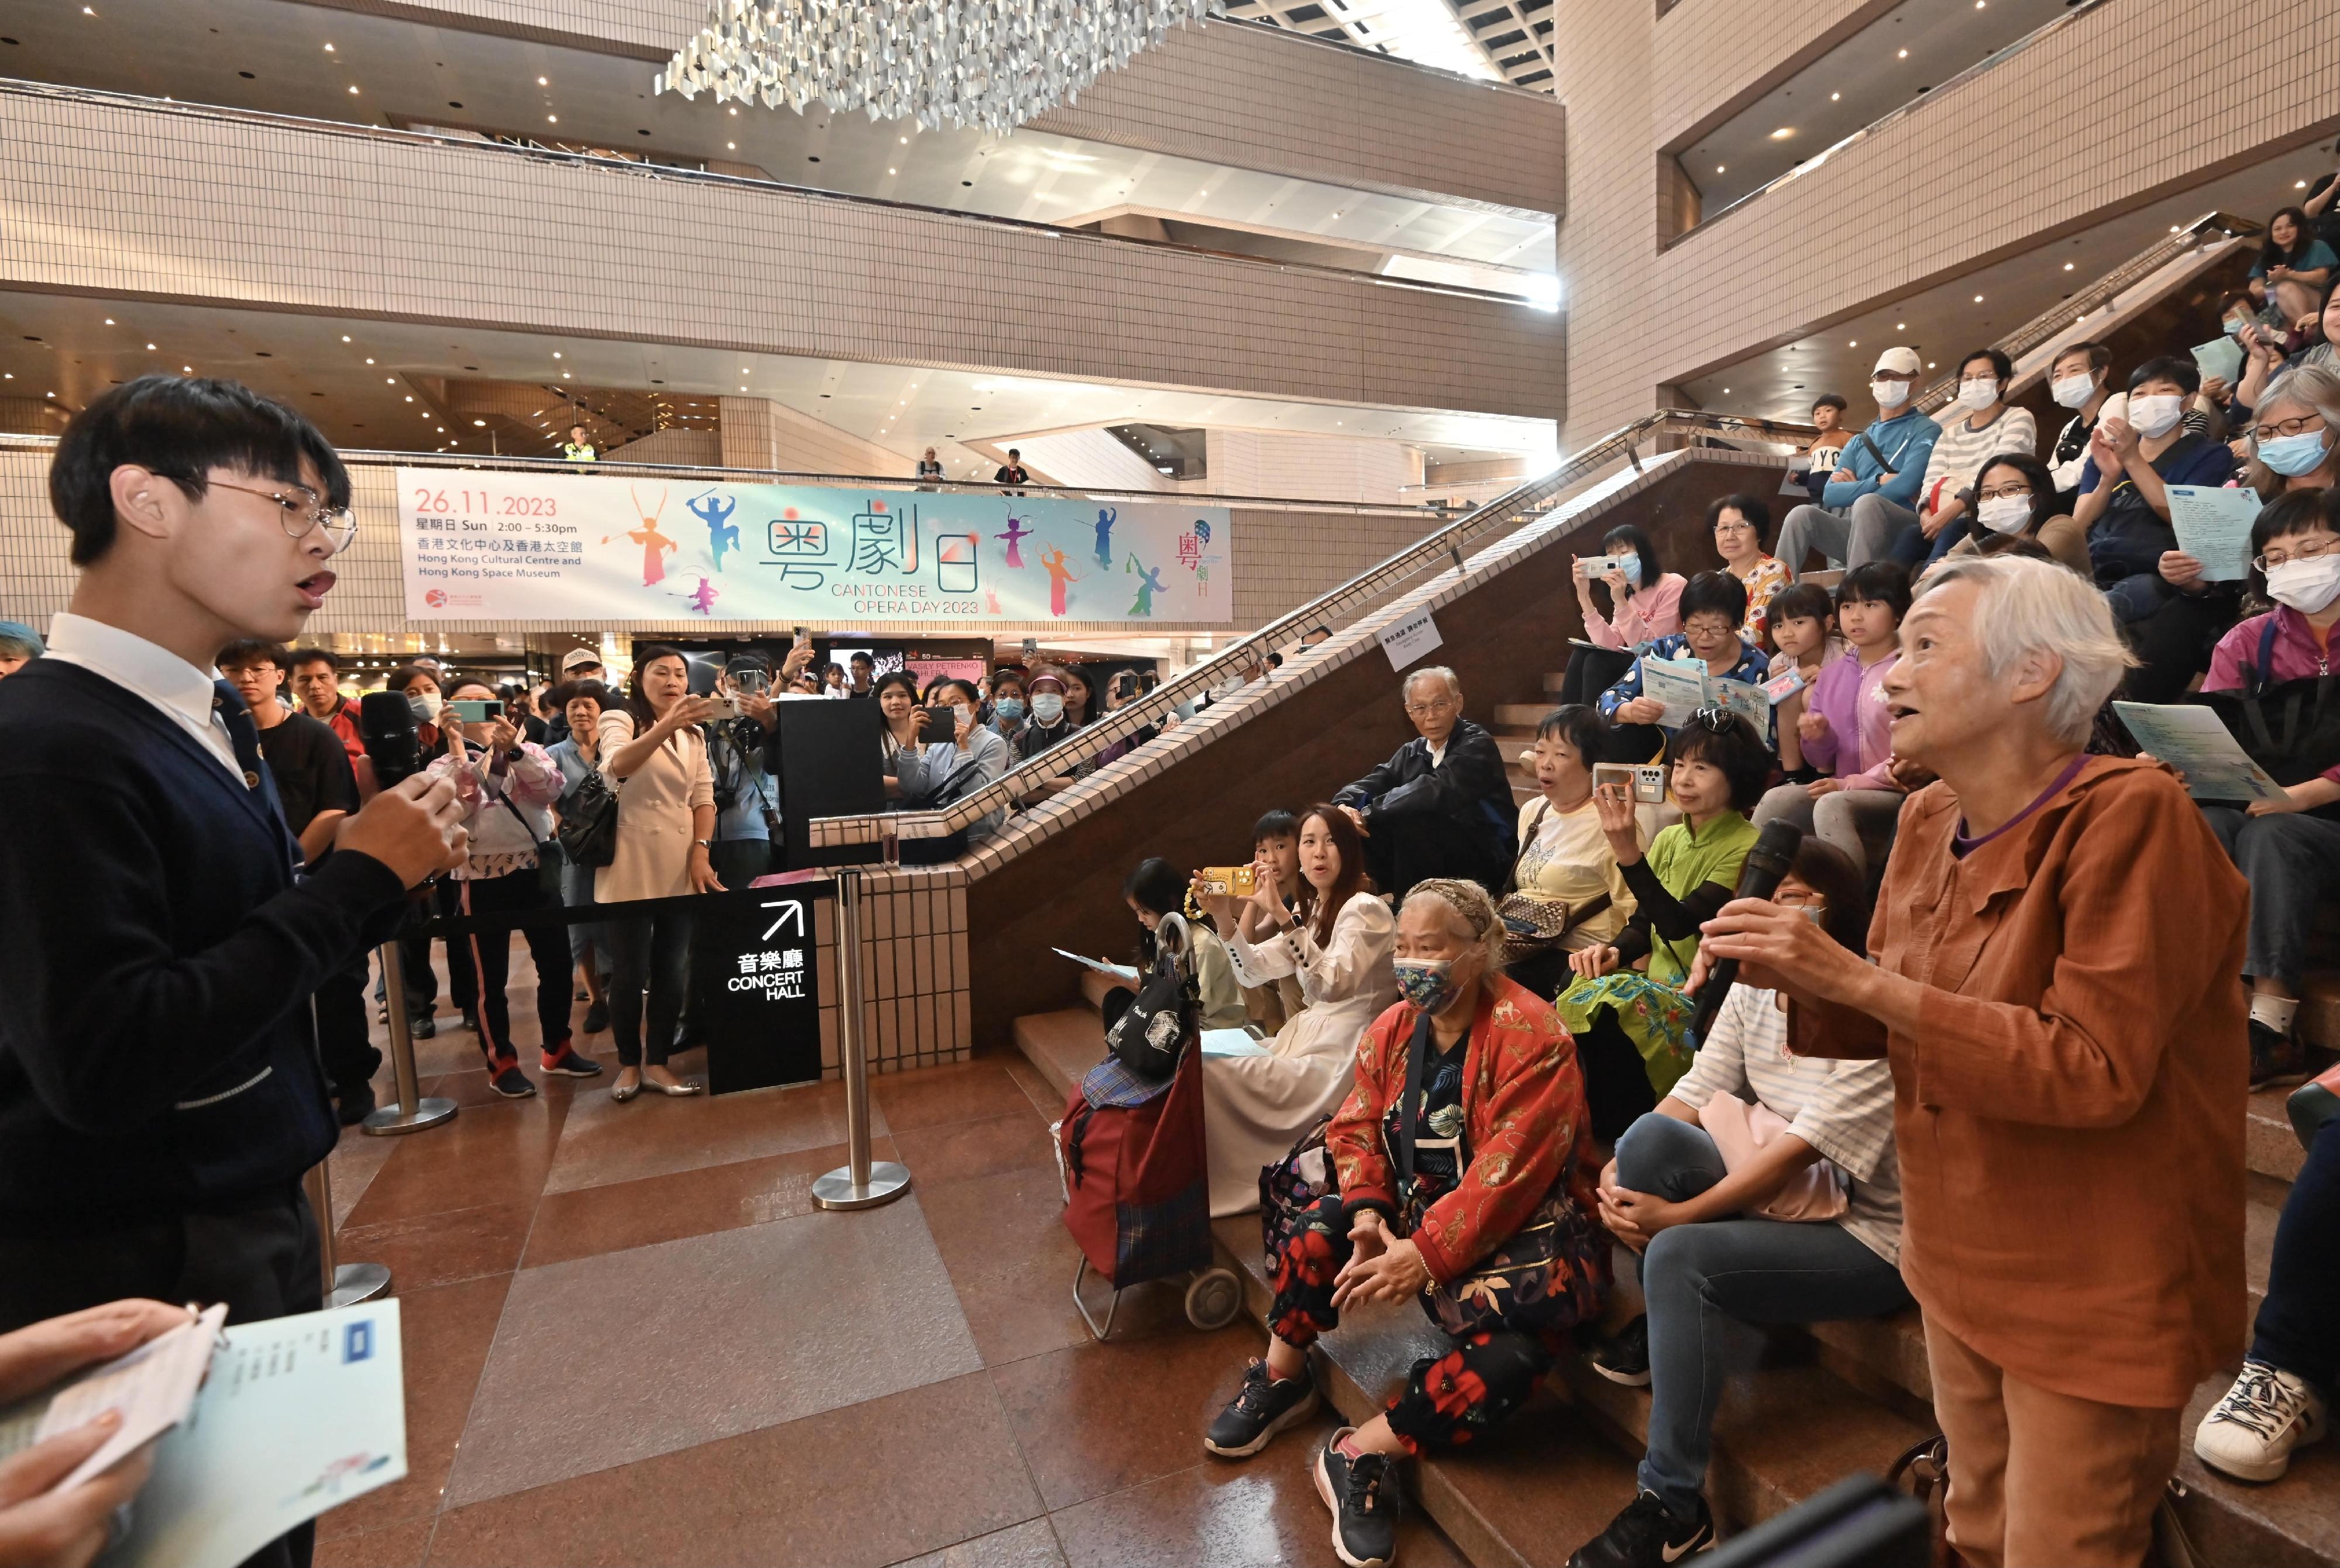 The annual Cantonese Opera Day, presented by the Leisure and Cultural Services Department, was held this afternoon (November 26). Photo shows visitors taking part in the activity of Cantonese Opera Day at the Hong Kong Cultural Centre.